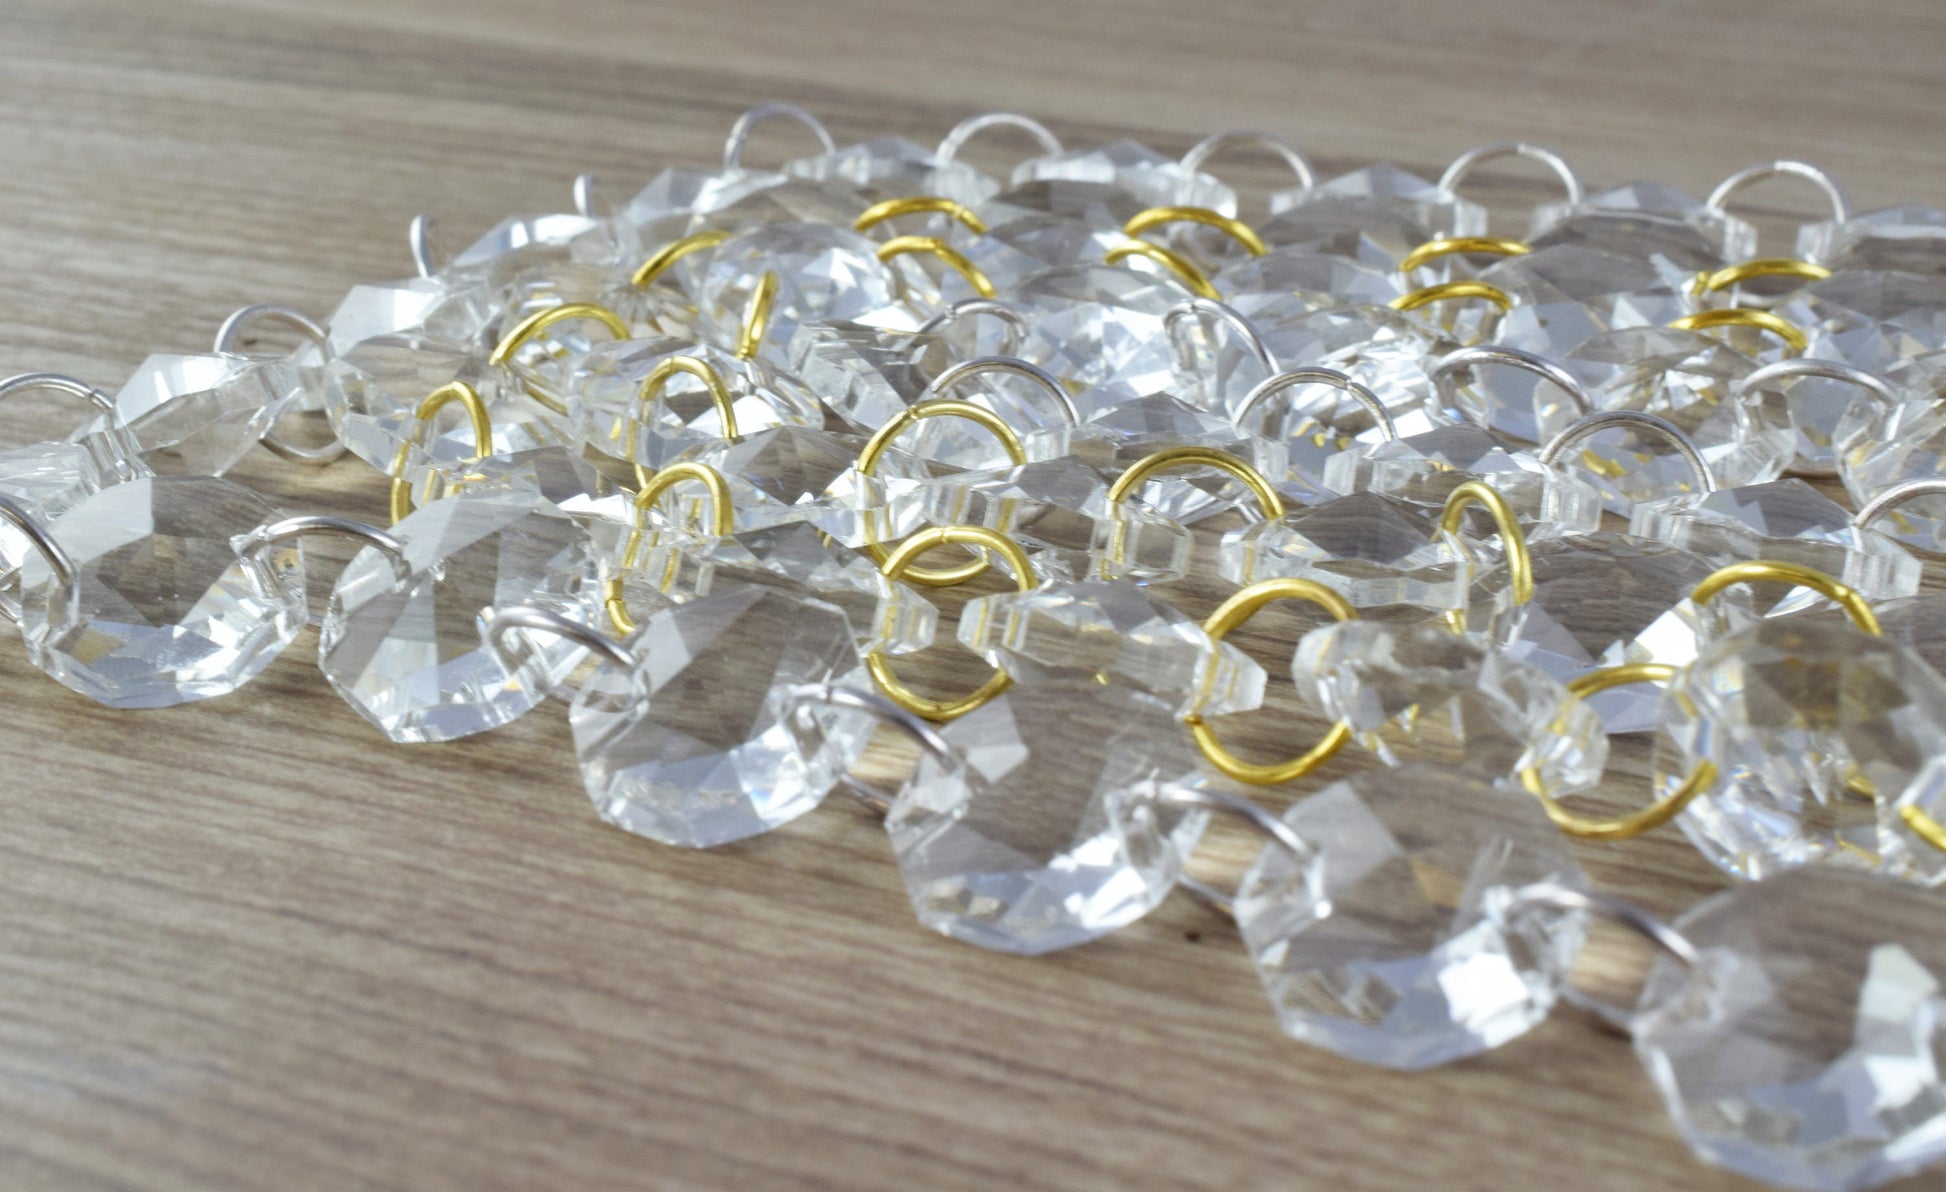 14mm 1 Yard Crystal Glass Beaded Garland for Wedding Centerpiece Decorations, Party Decor, Gold,Silver Crystal Bead Garland,Wedding Supplies